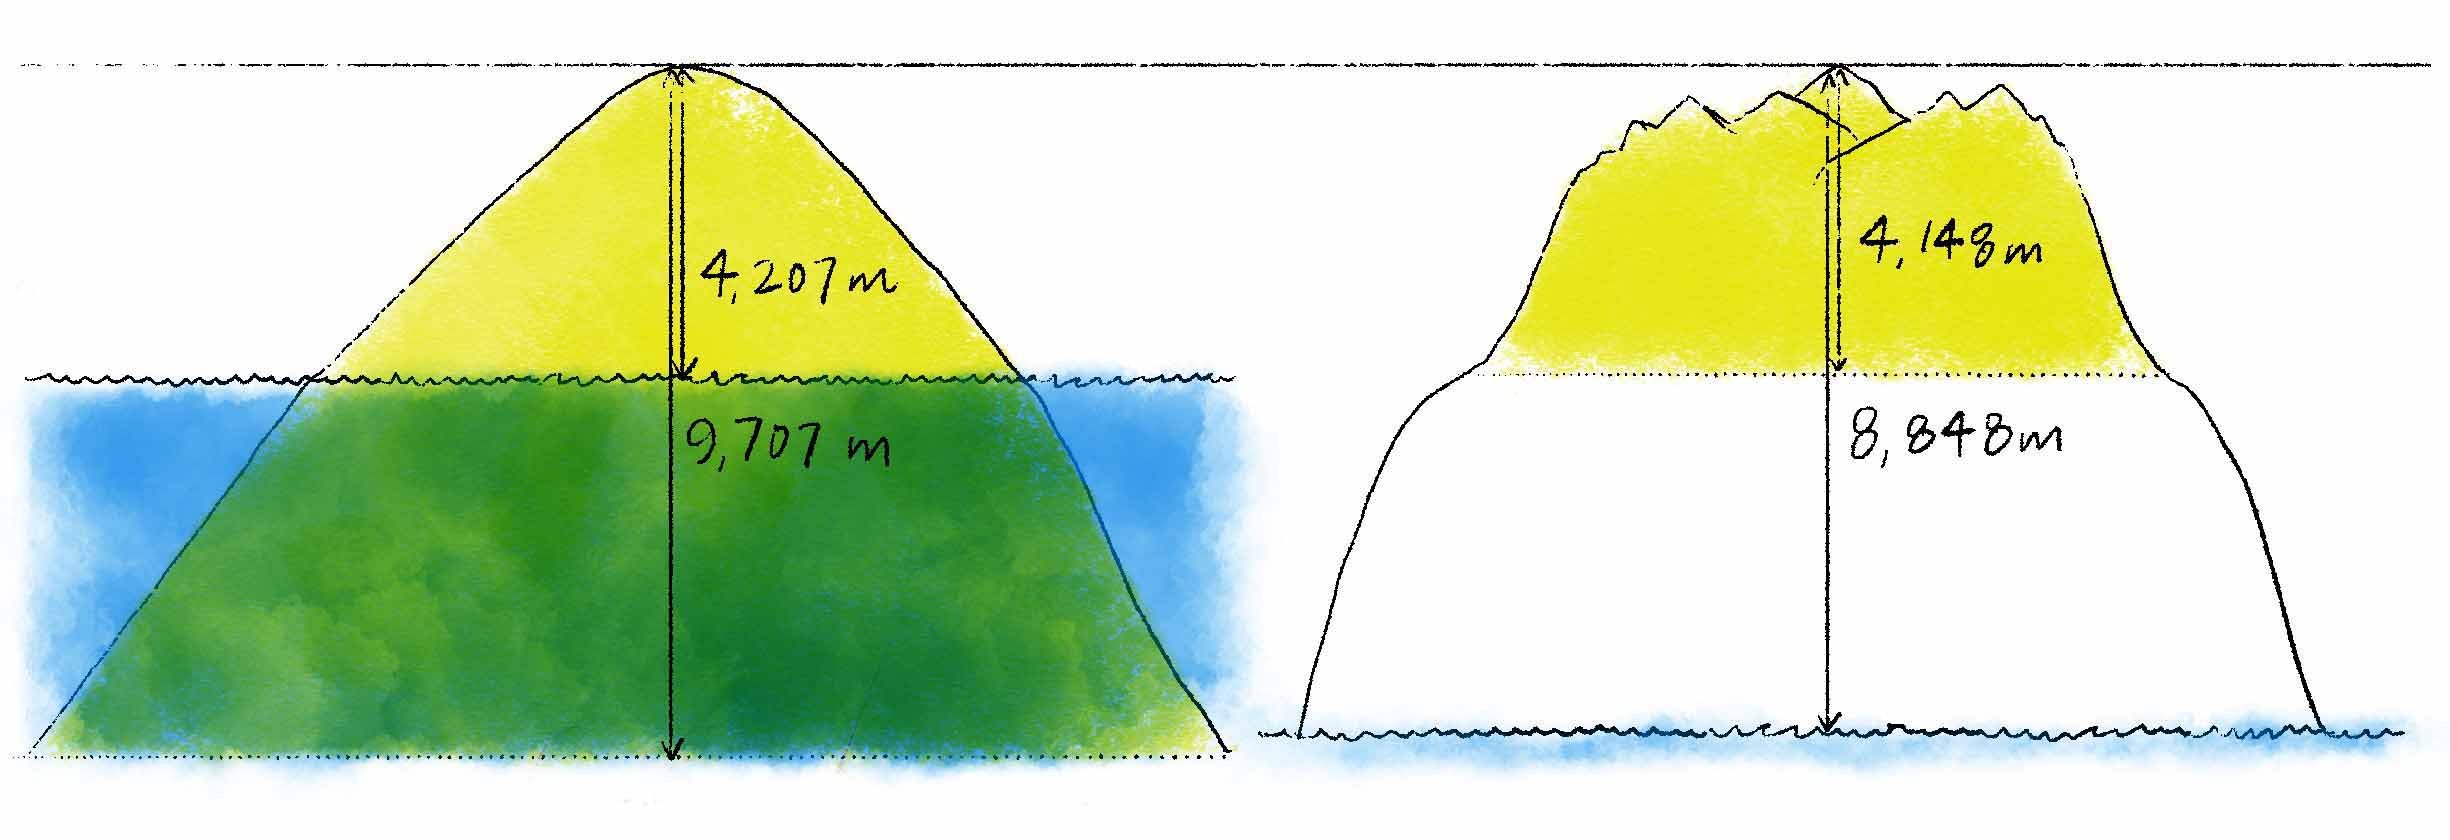 A drawing of Mauna Kea and Everest side by side with their peaks aligned, and sea level and the baselines demarcated.